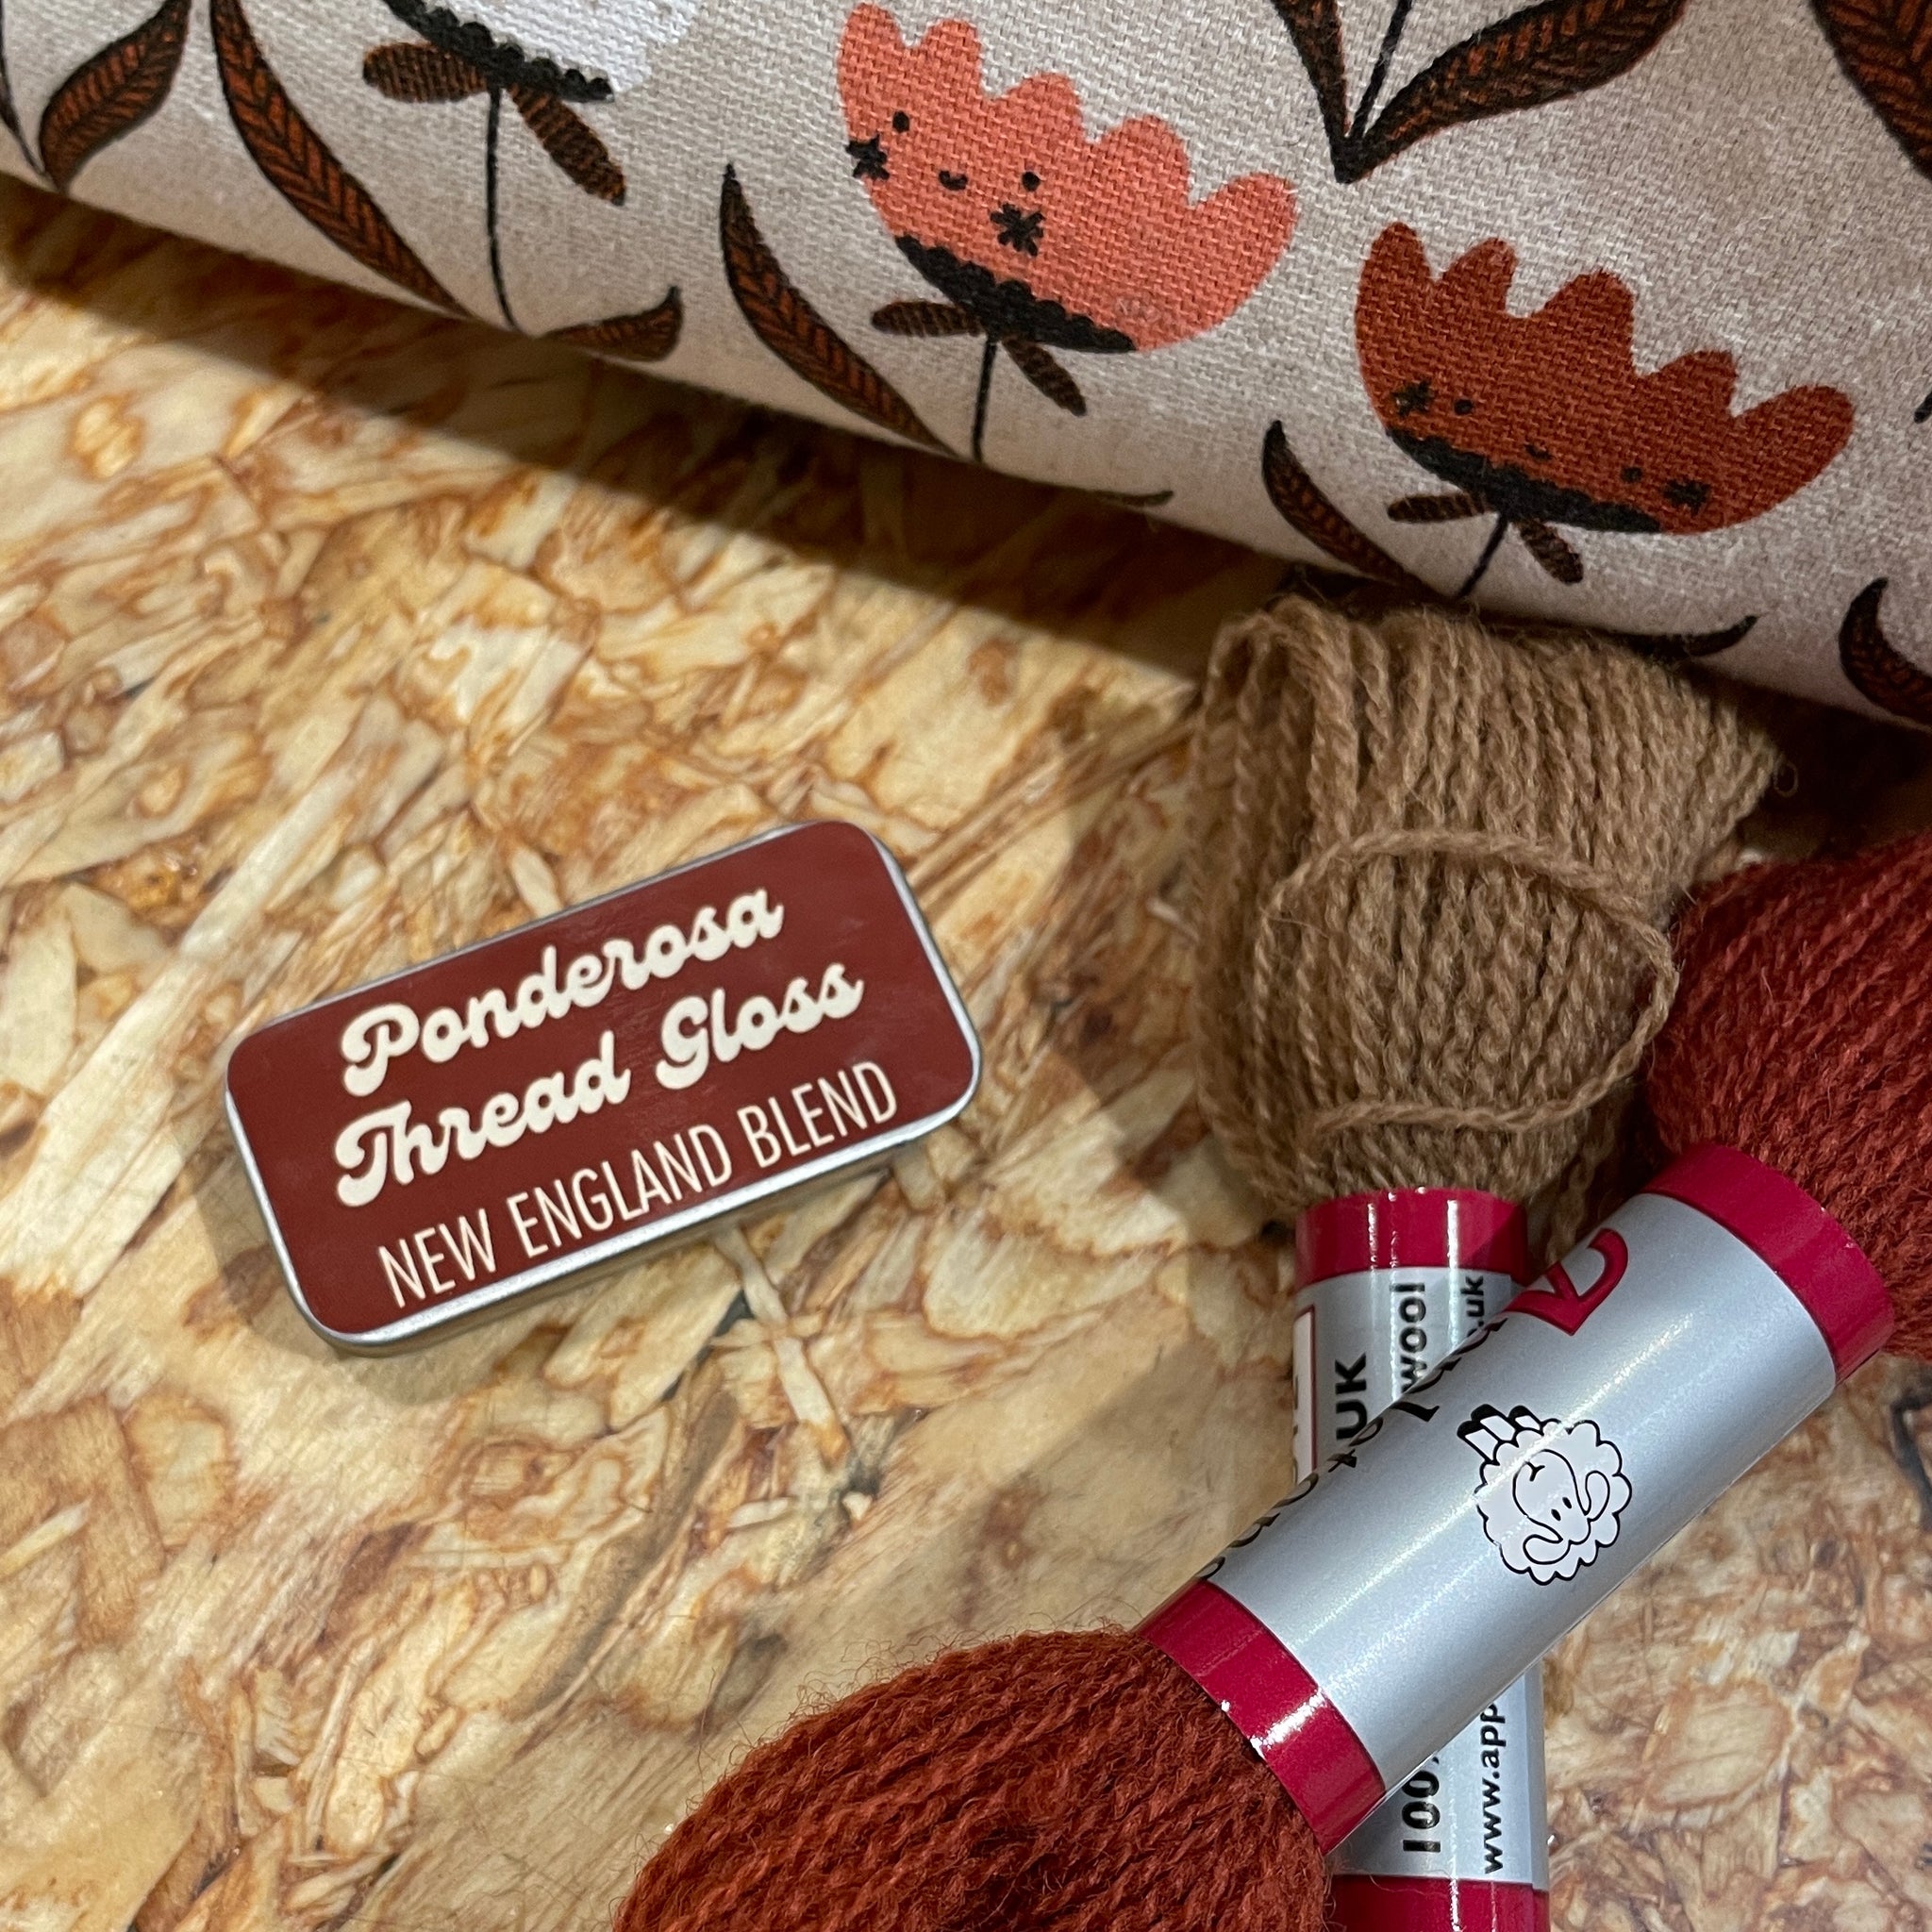 Ponderosa Creative-New England Blend Thread Gloss-sewing notion-gather here online